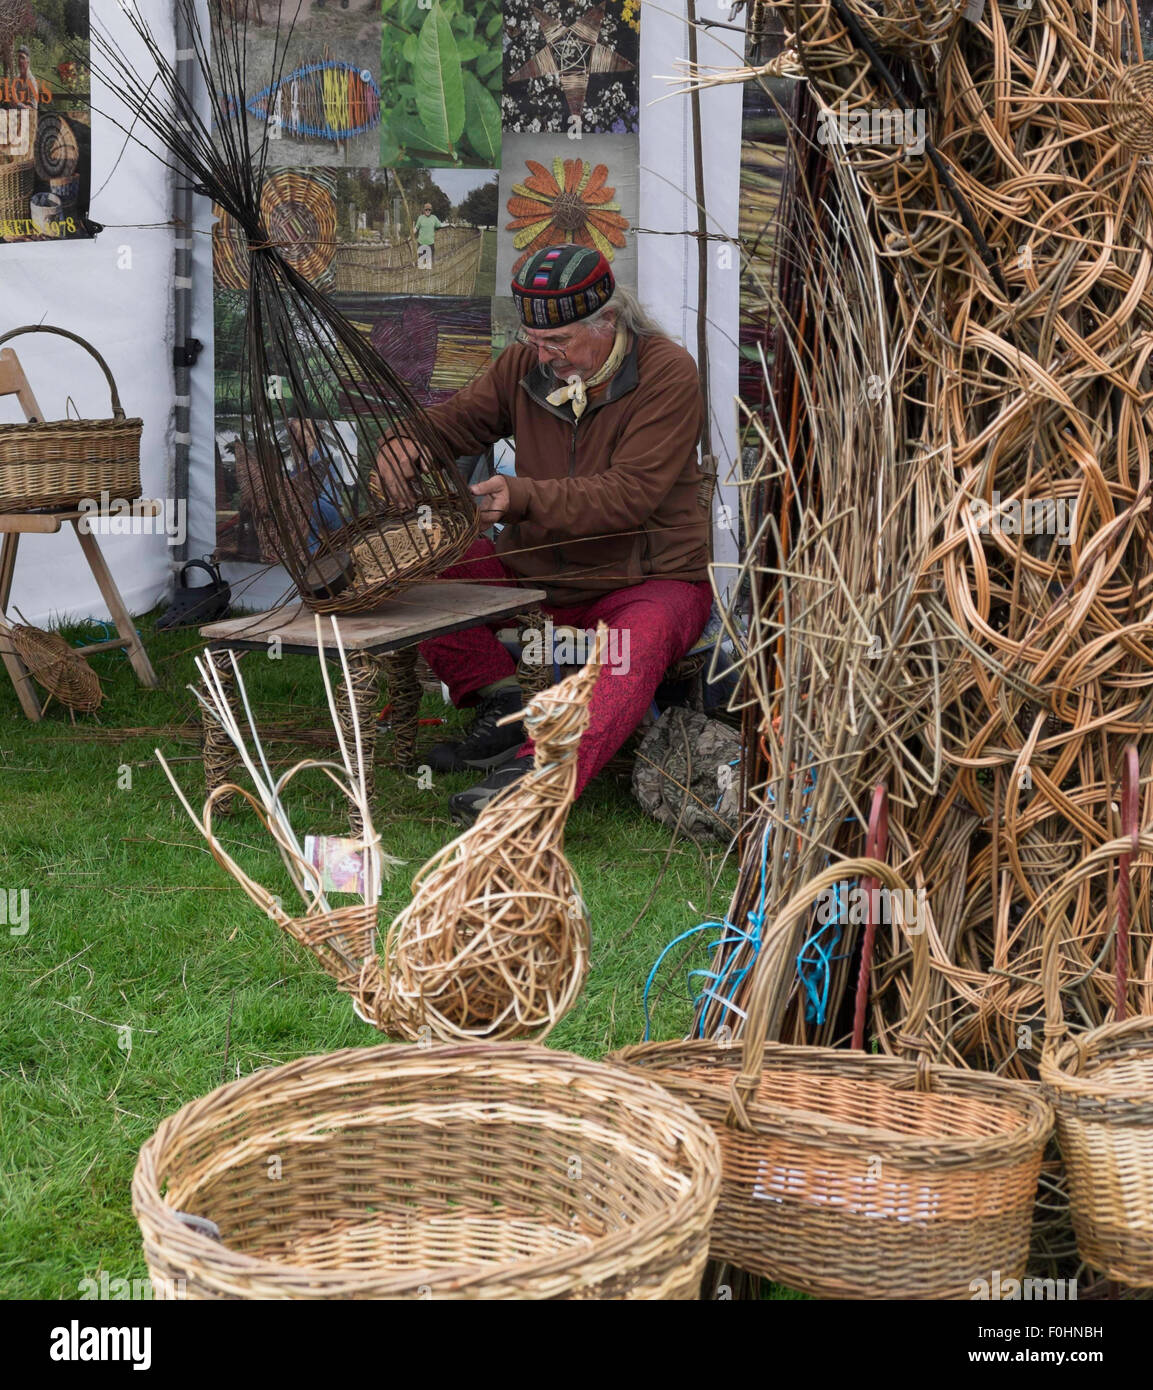 Demonstrating the craft off basket making country fair Cumbria July 2015 Stock Photo